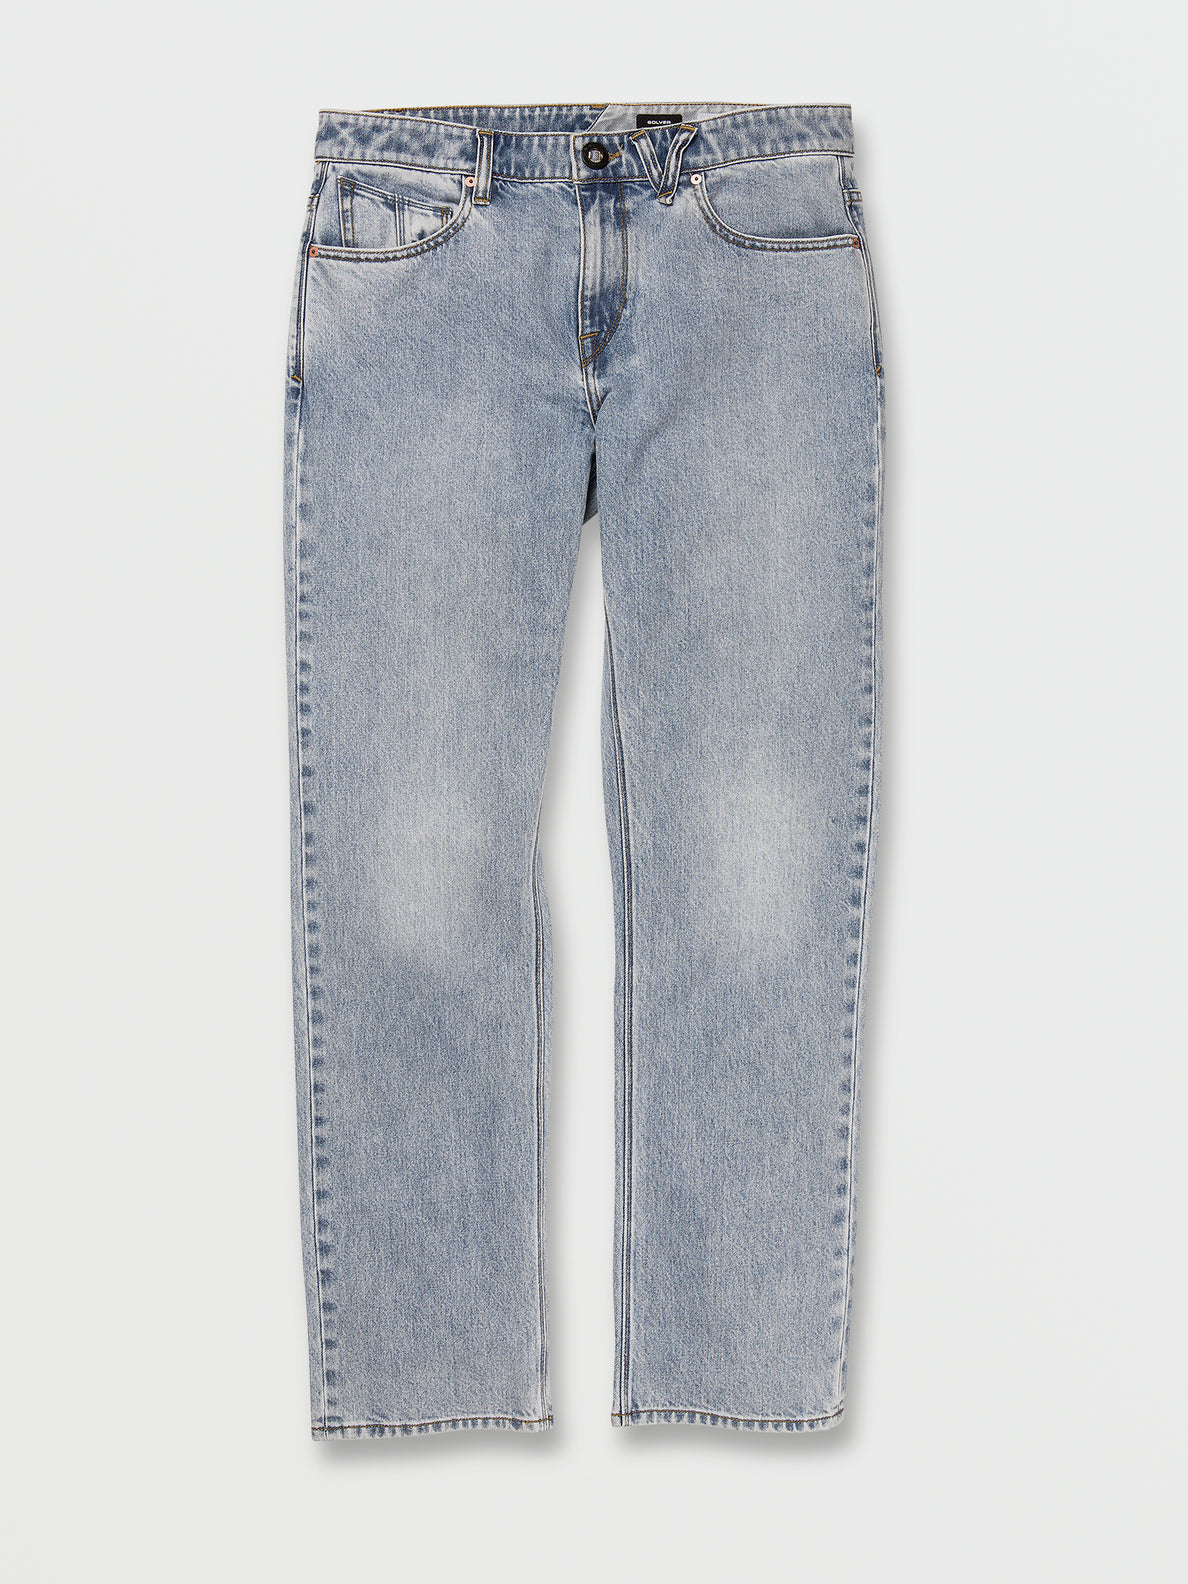 SOLVER MODERN FIT JEANS - HEAVY WORN FADED